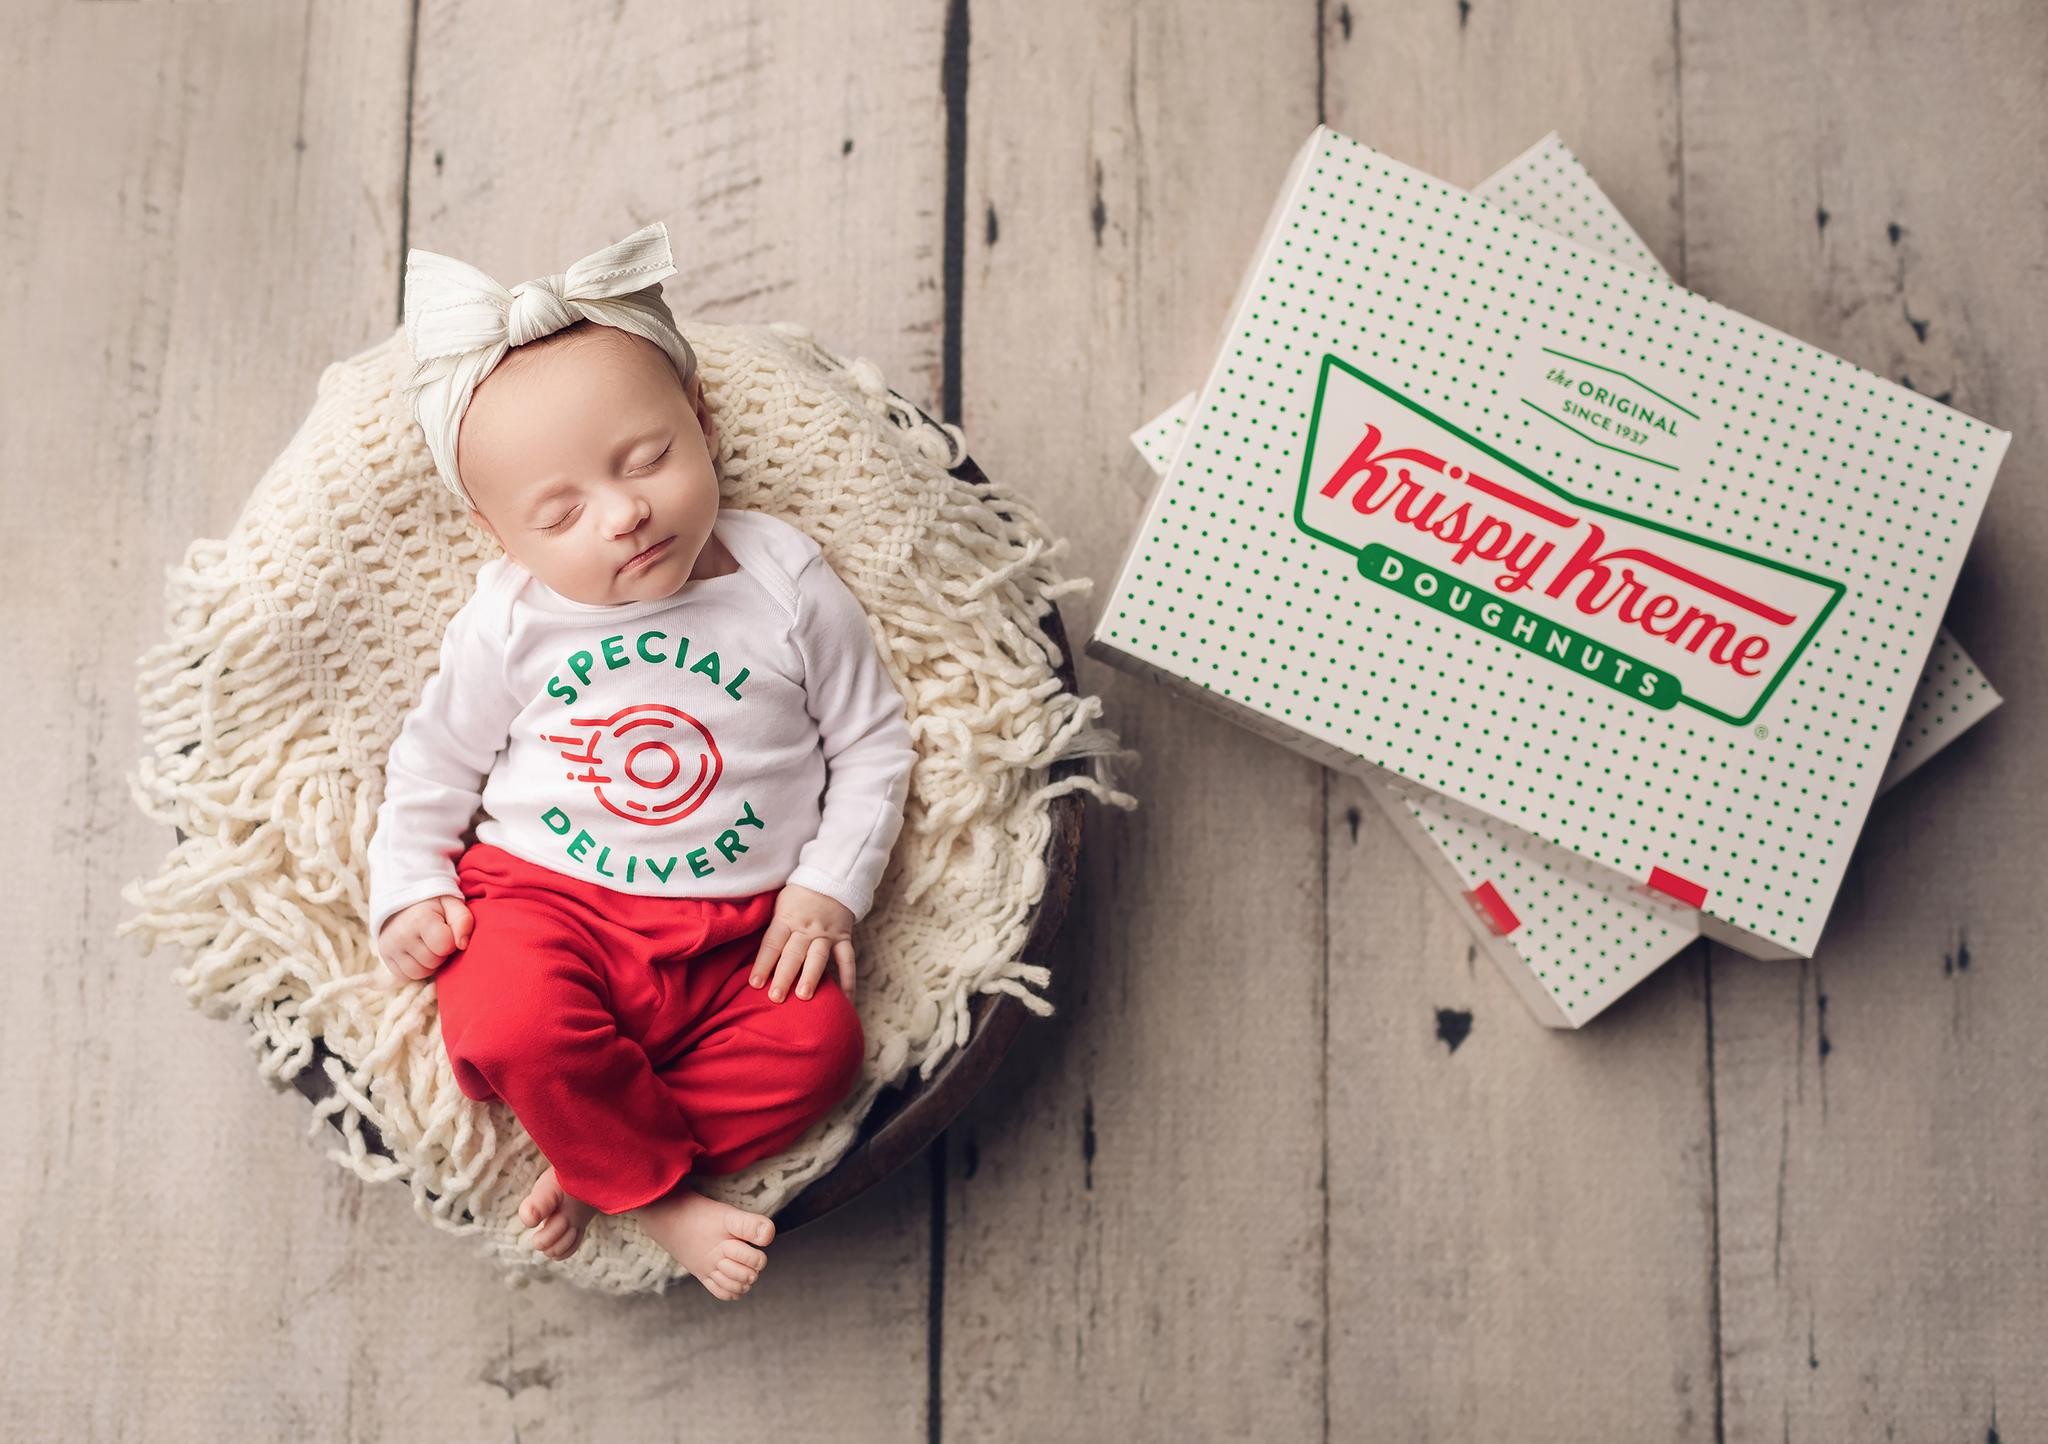 Krispy Kreme Doughnuts Makes Creative ‘Leap’ to National Delivery